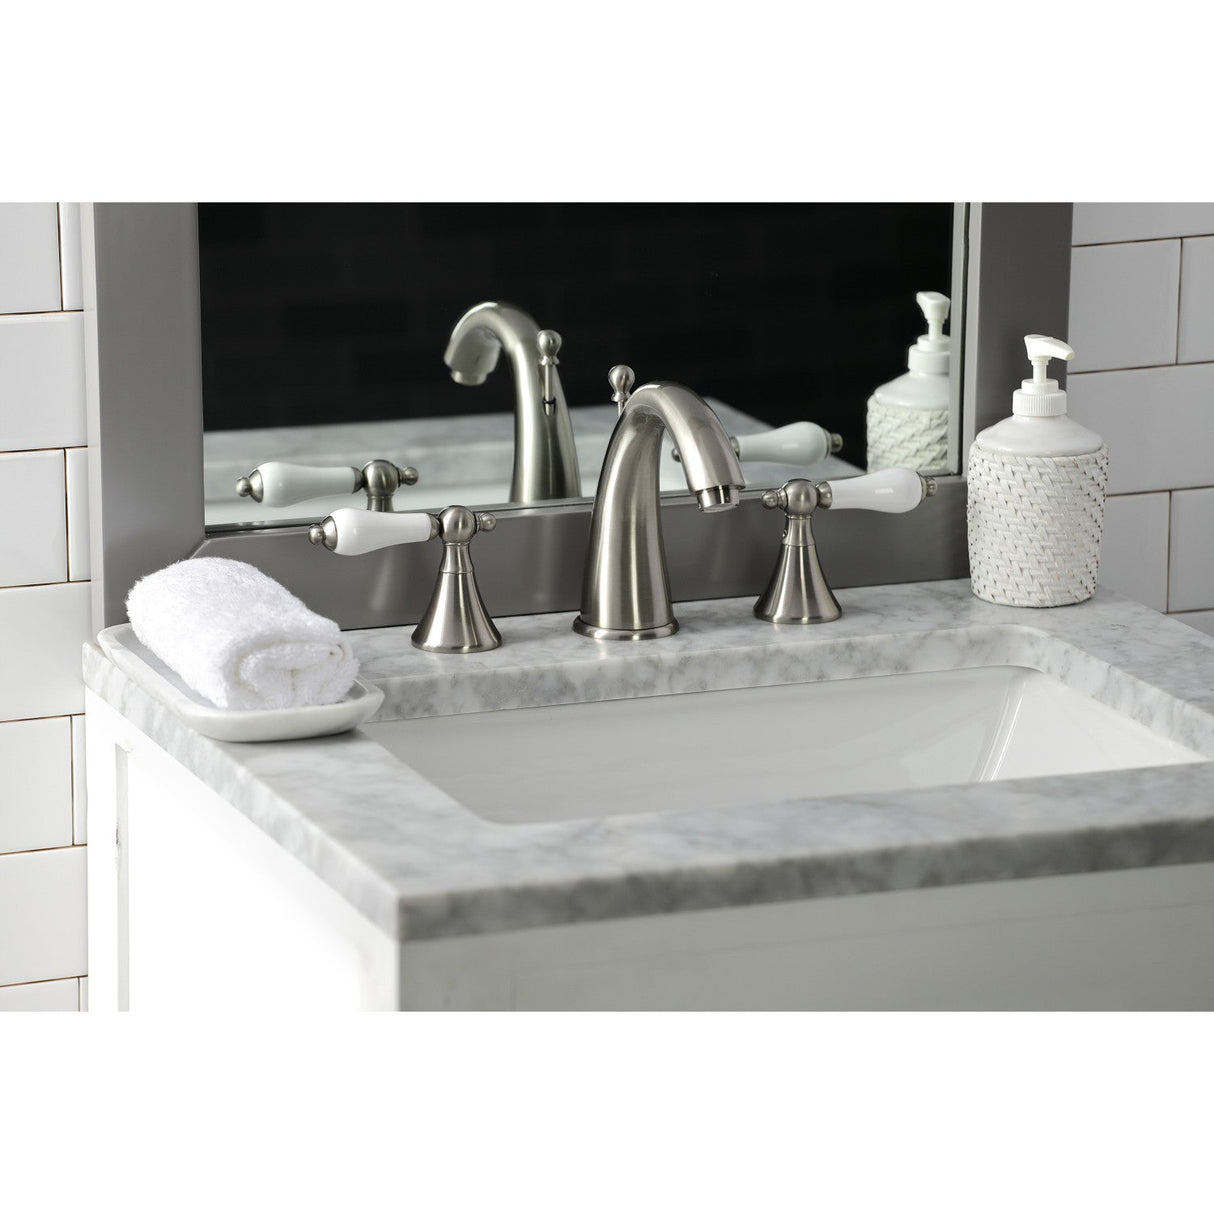 Naples KS2978PL Two-Handle 3-Hole Deck Mount Widespread Bathroom Faucet with Brass Pop-Up, Brushed Nickel